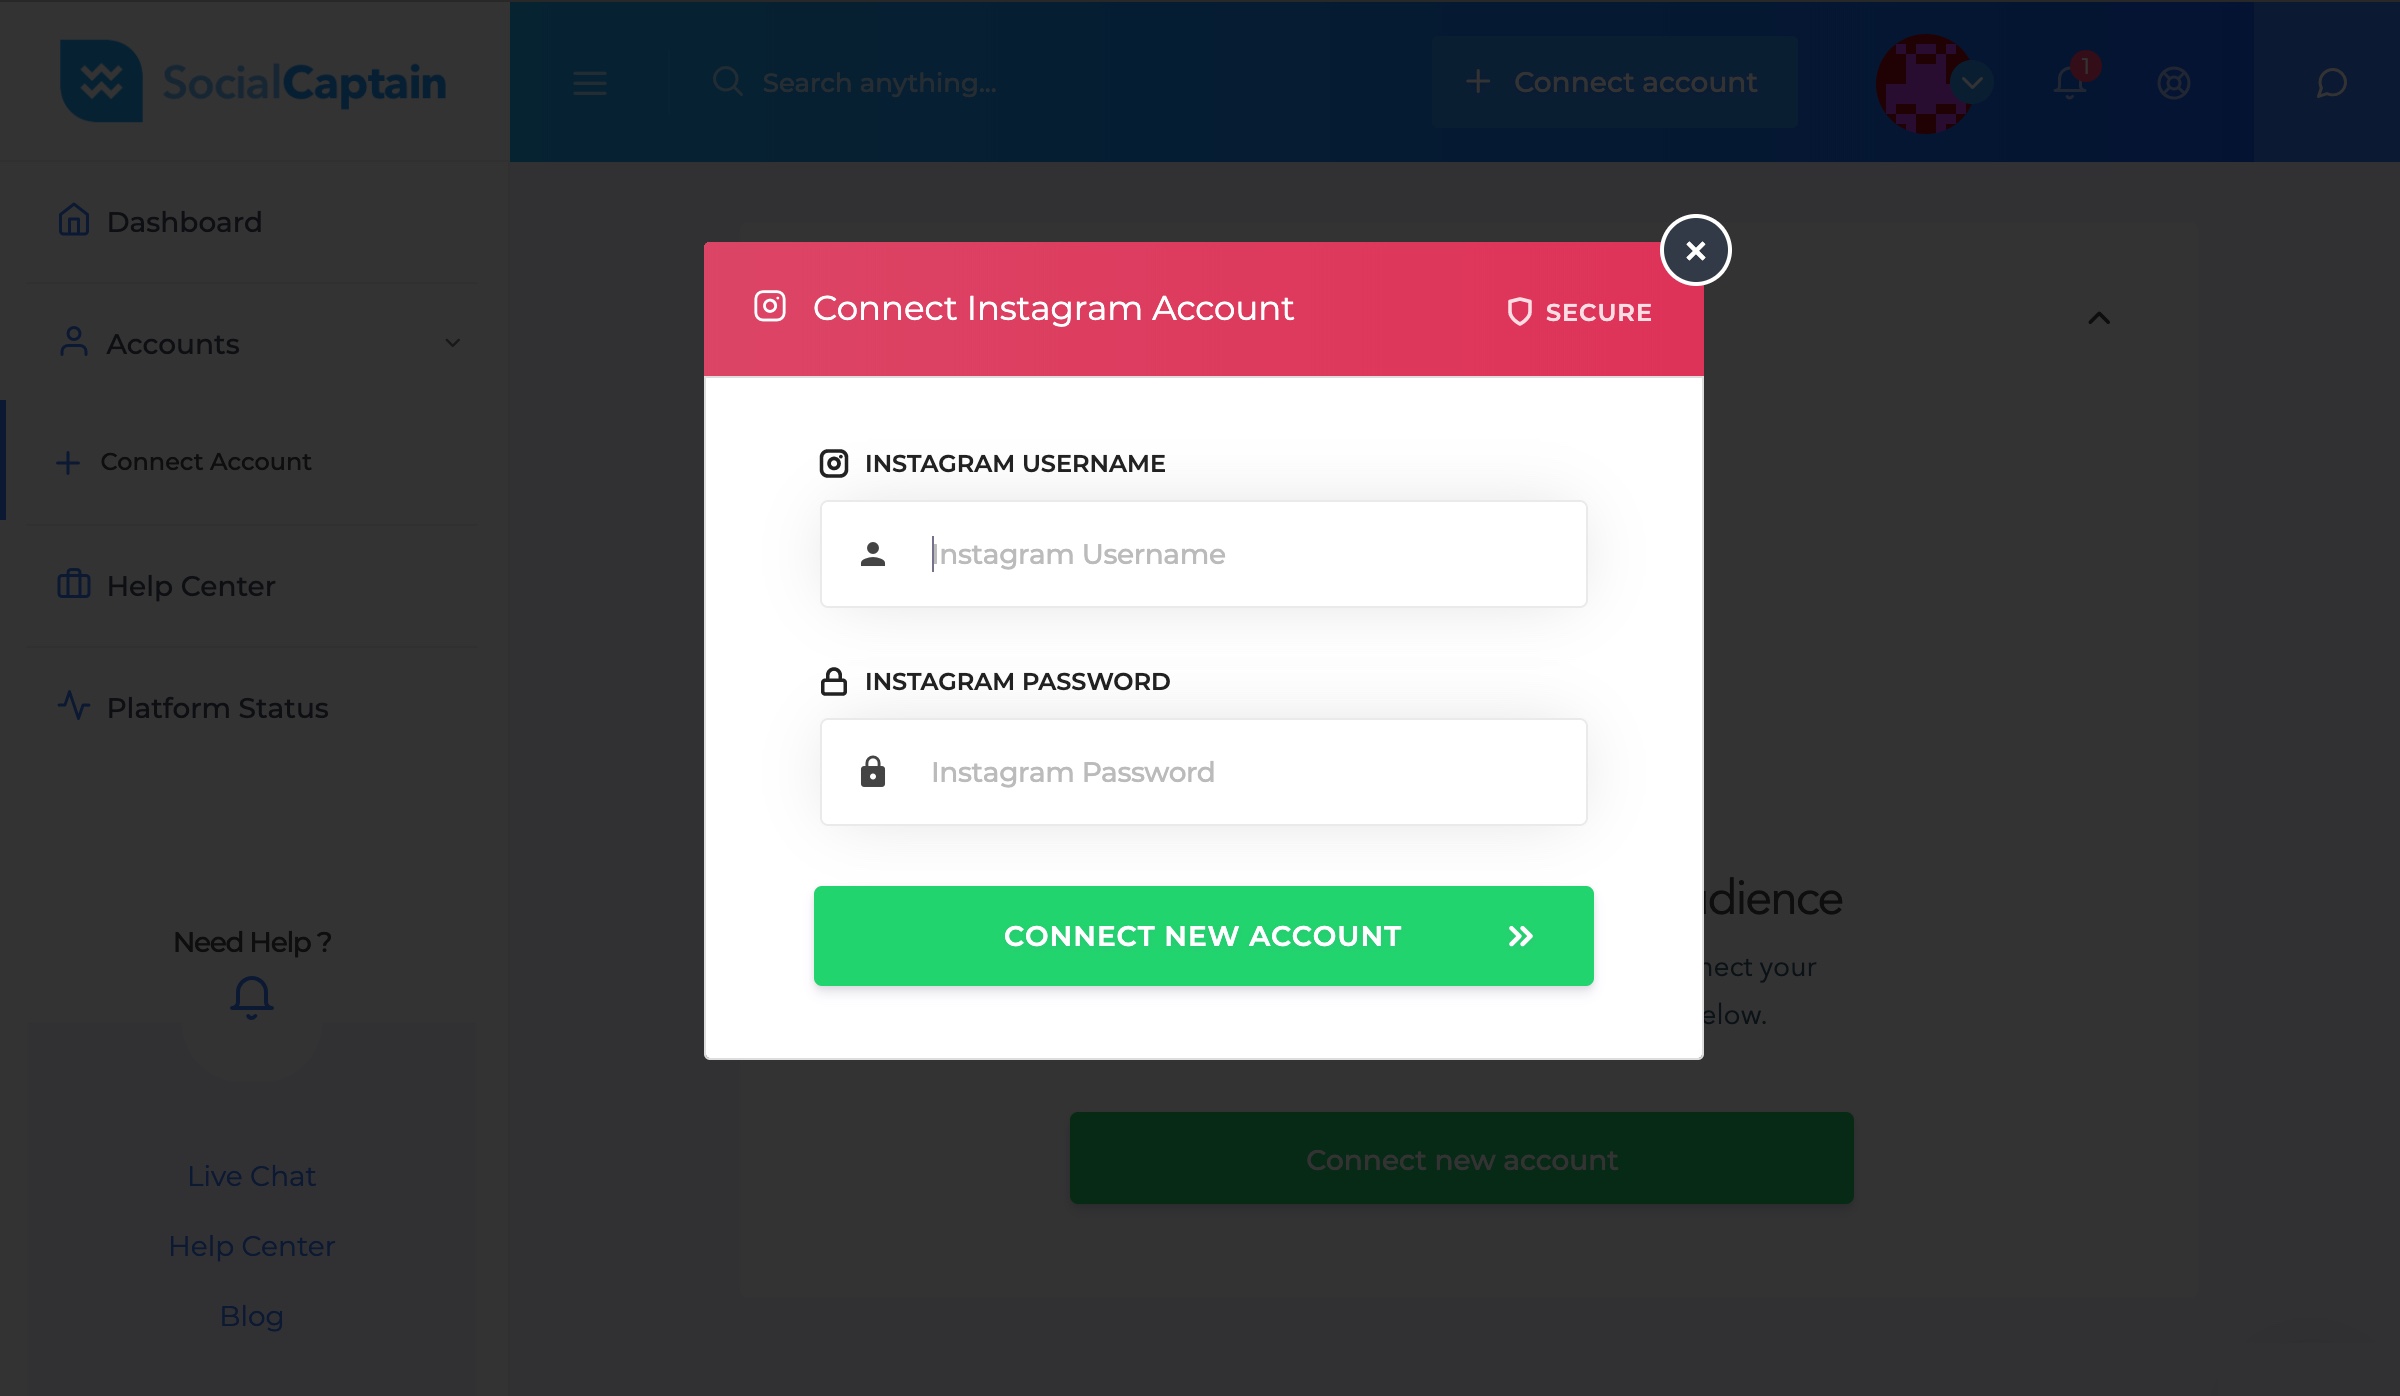 Social Media Boosting Service Exposed Thousands Of Instagram